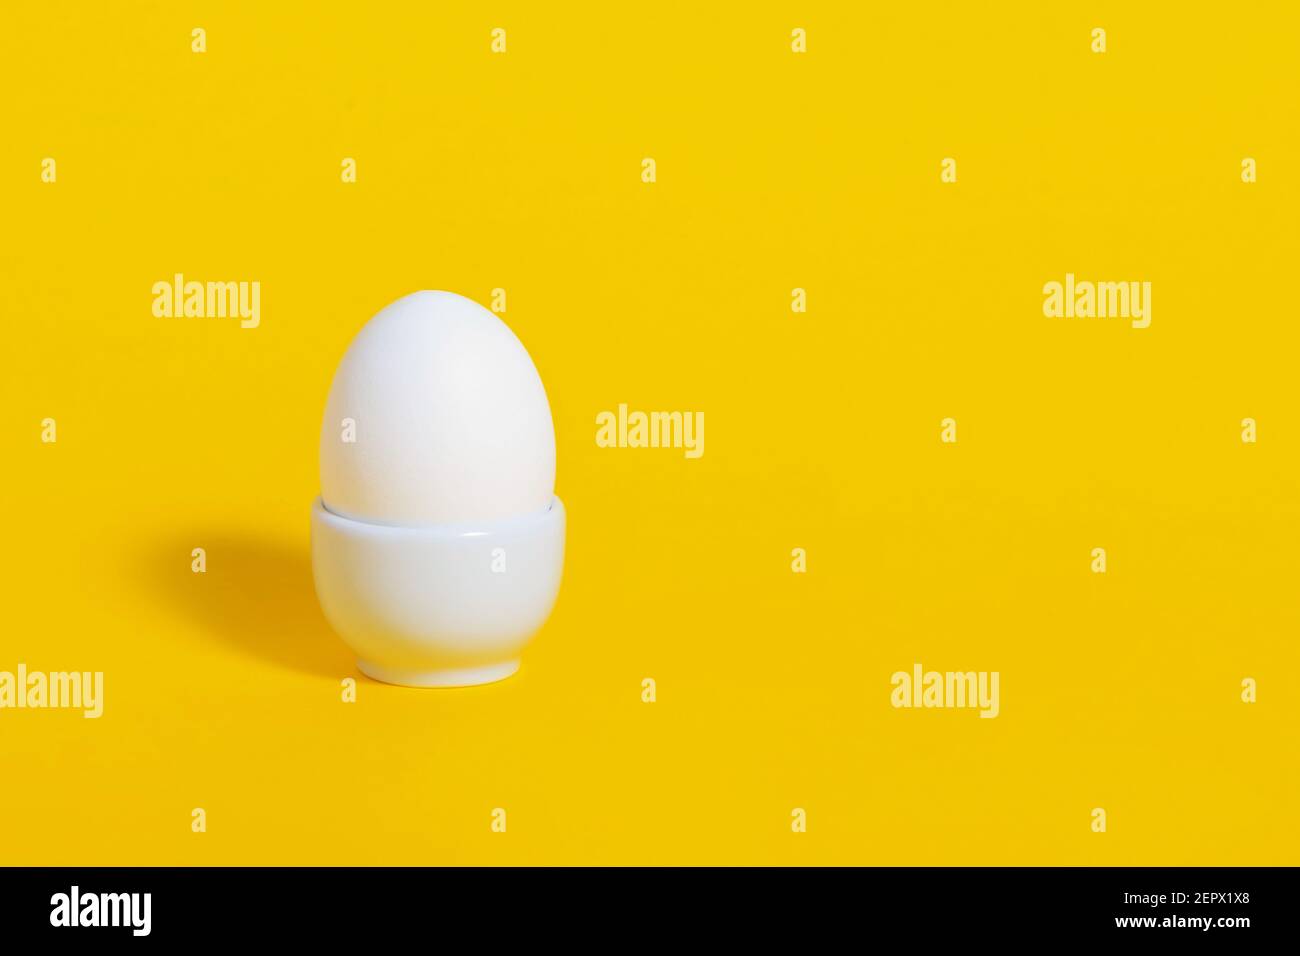 White chicken egg in white ceramic tray on bright, saturated yellow background. Easter breakfast concept. Copy space. Organic product, meal, food. Stock Photo